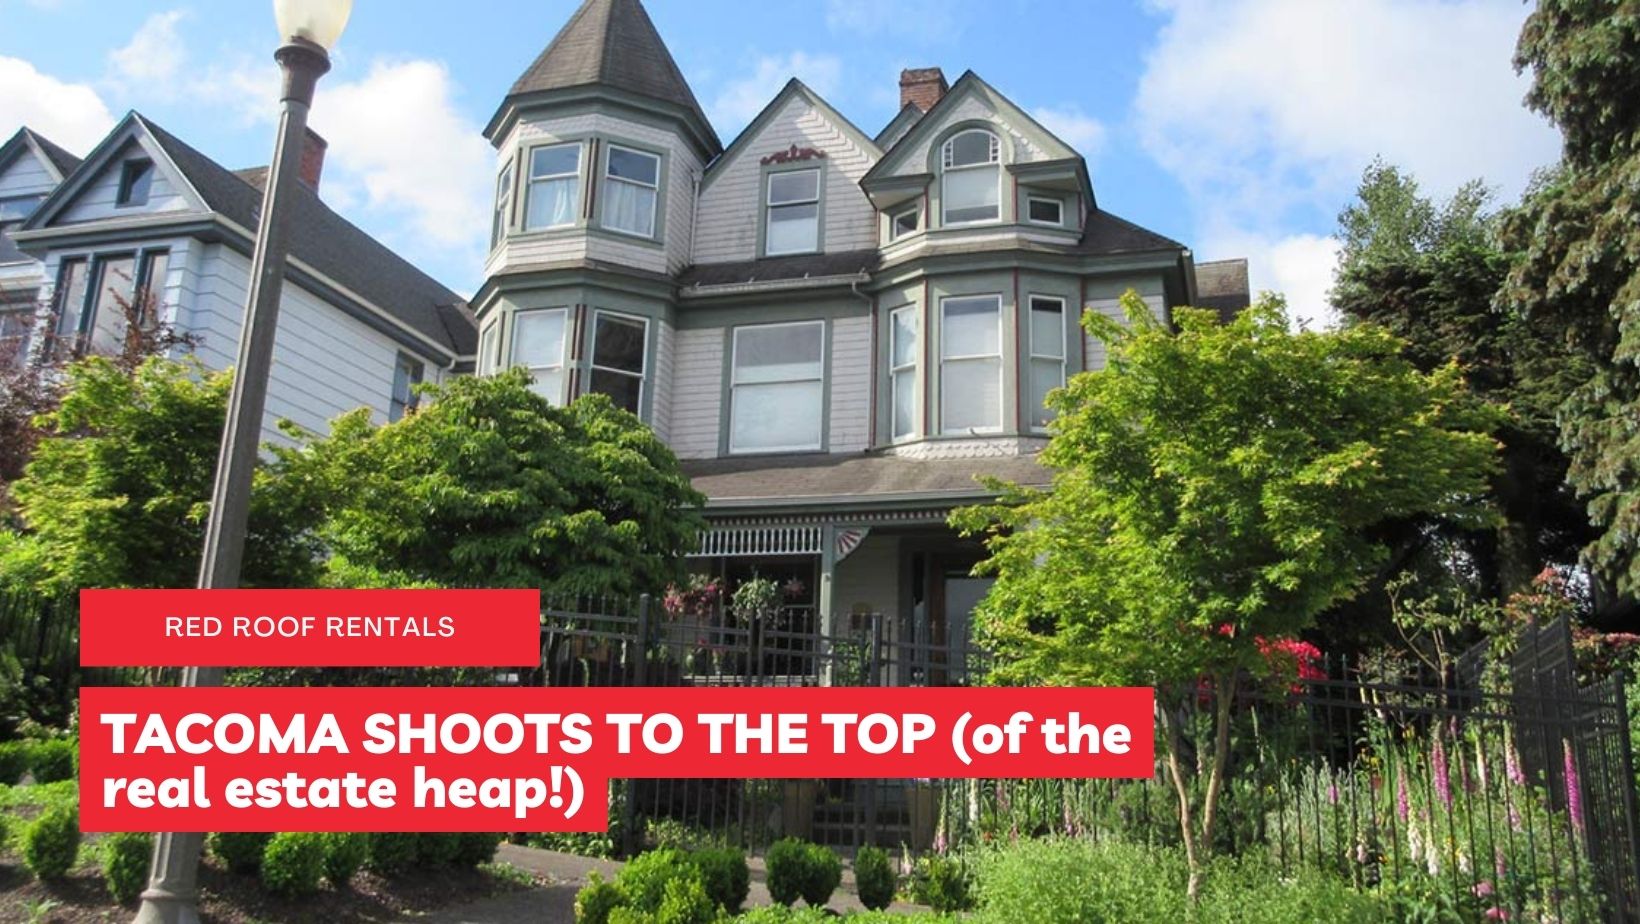 TACOMA SHOOTS TO THE TOP (of the real estate heap!)